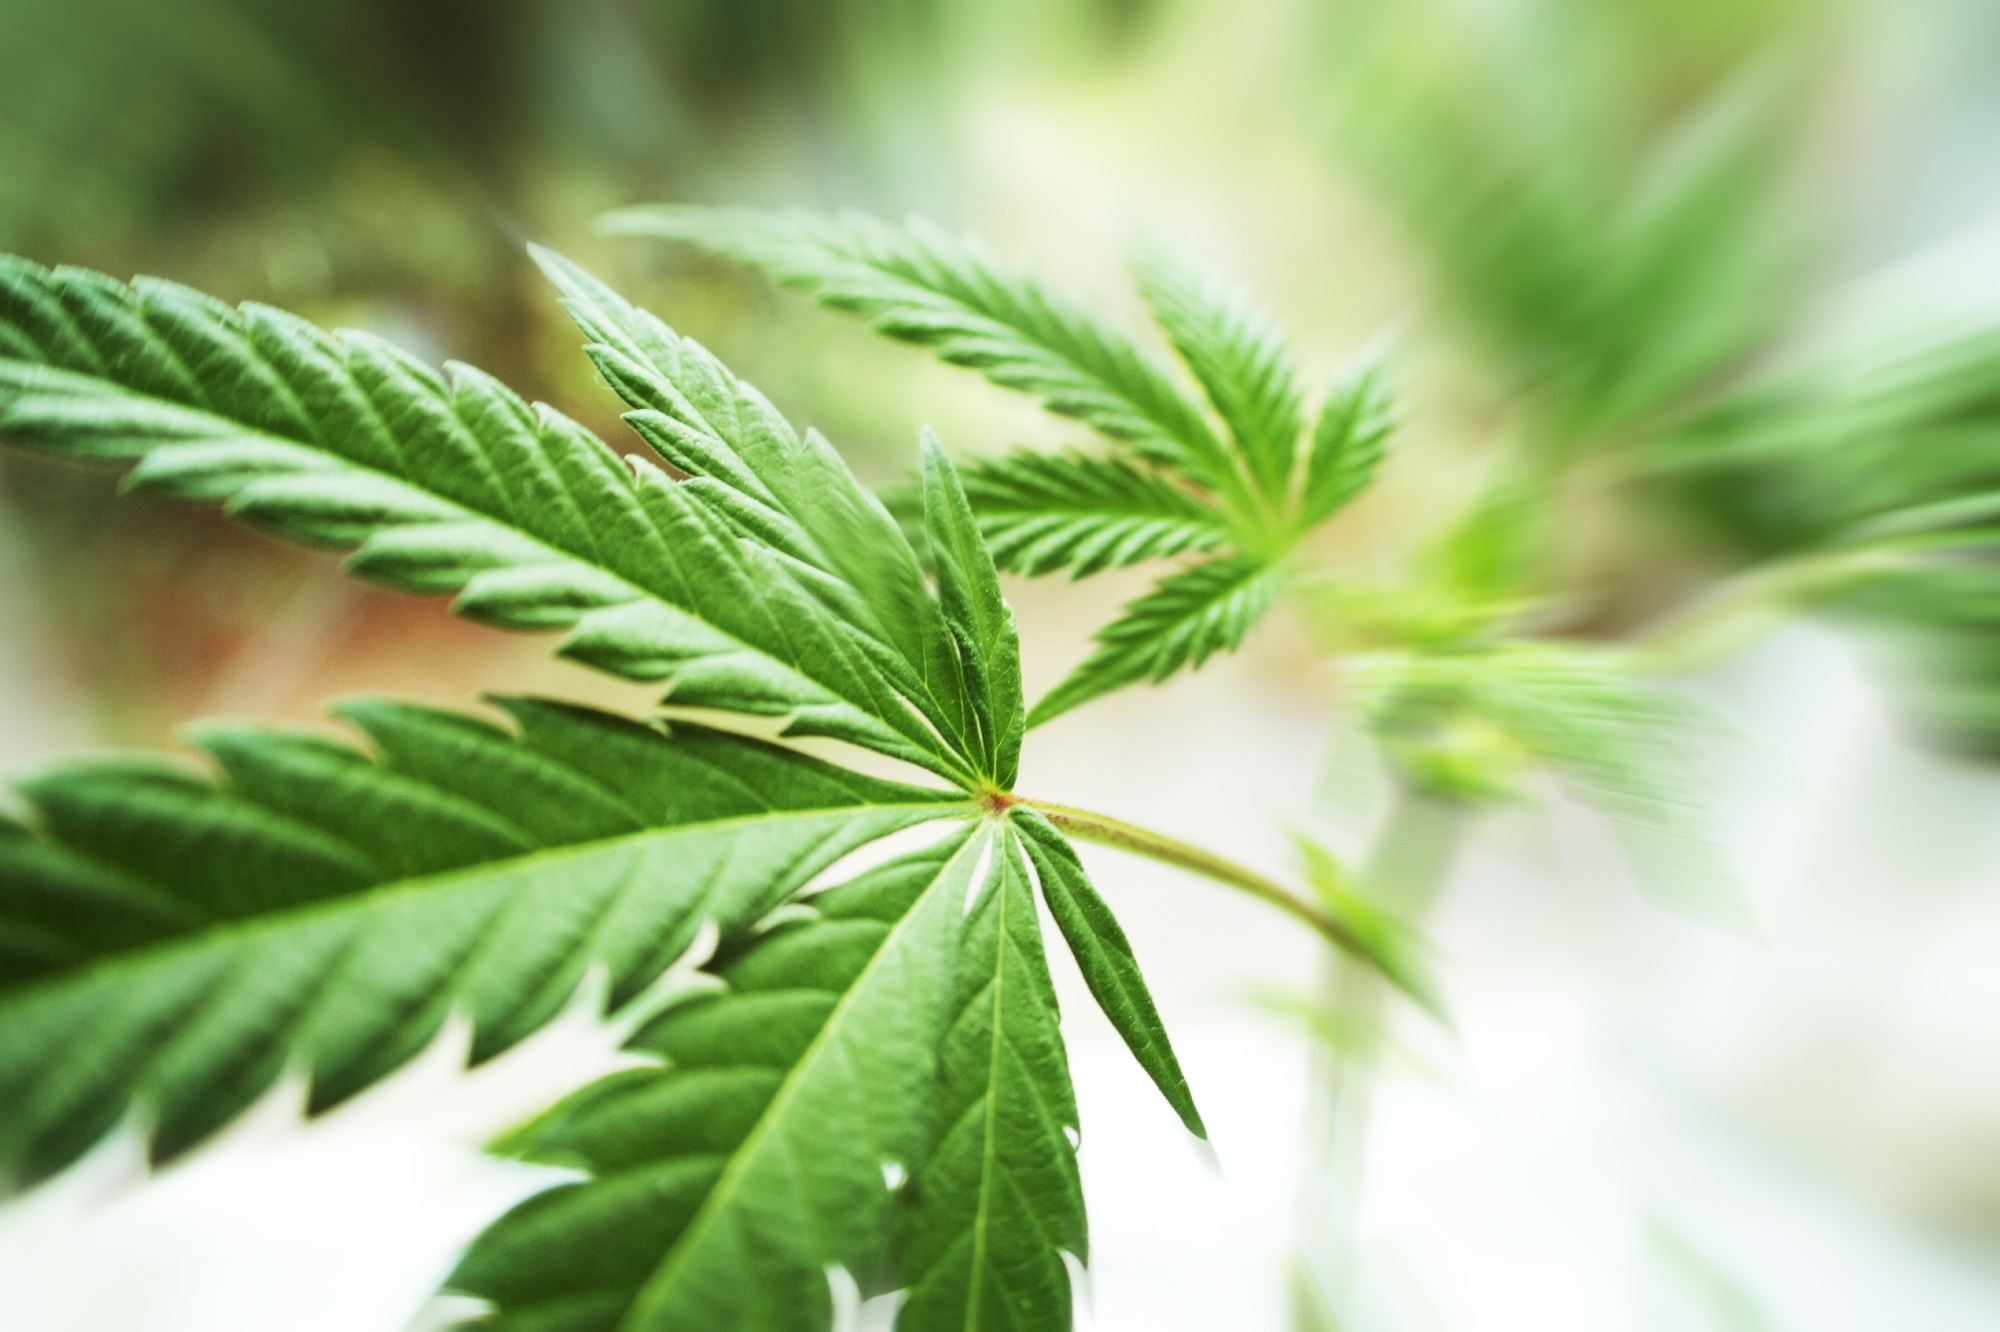 Study: Multi-ancestry genome-wide association study of cannabis use disorder yields insight into disease biology and public health implications. Image Credit: ShutterstockProfessional / Shutterstock.com